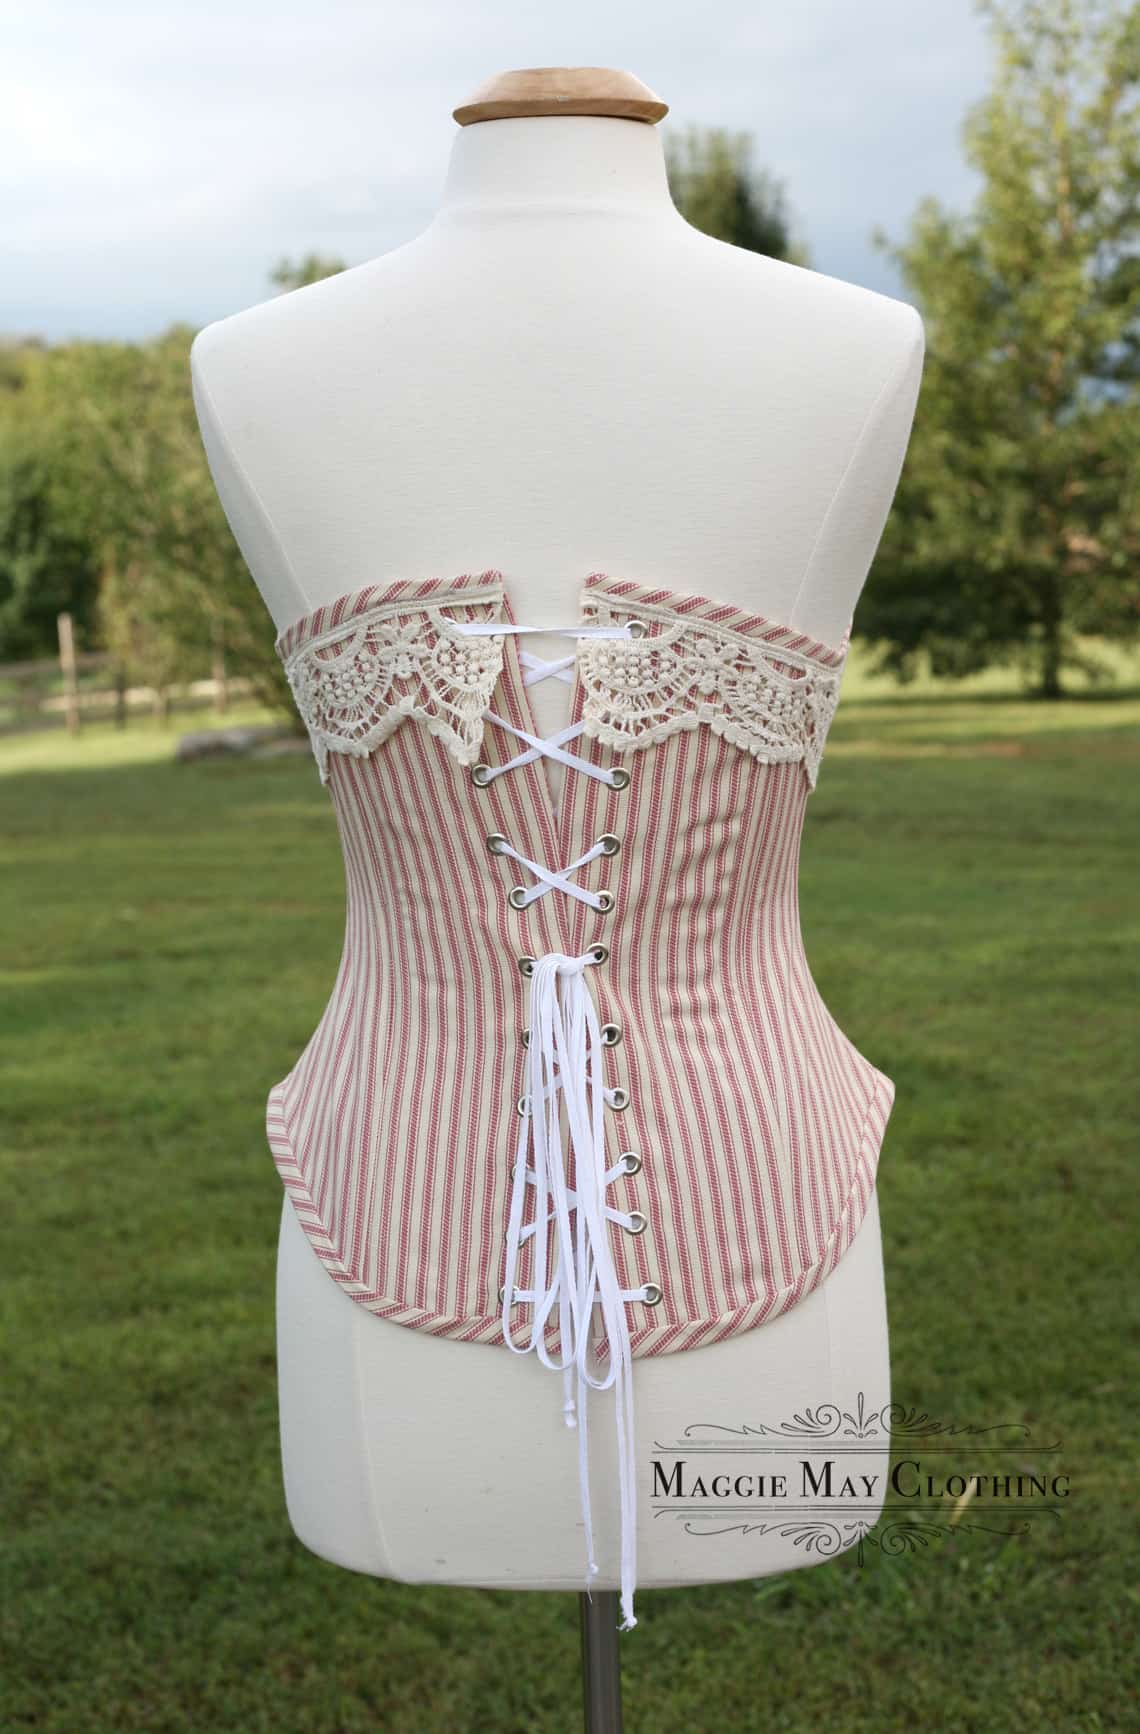 Wasp Waist: the History of the Corset